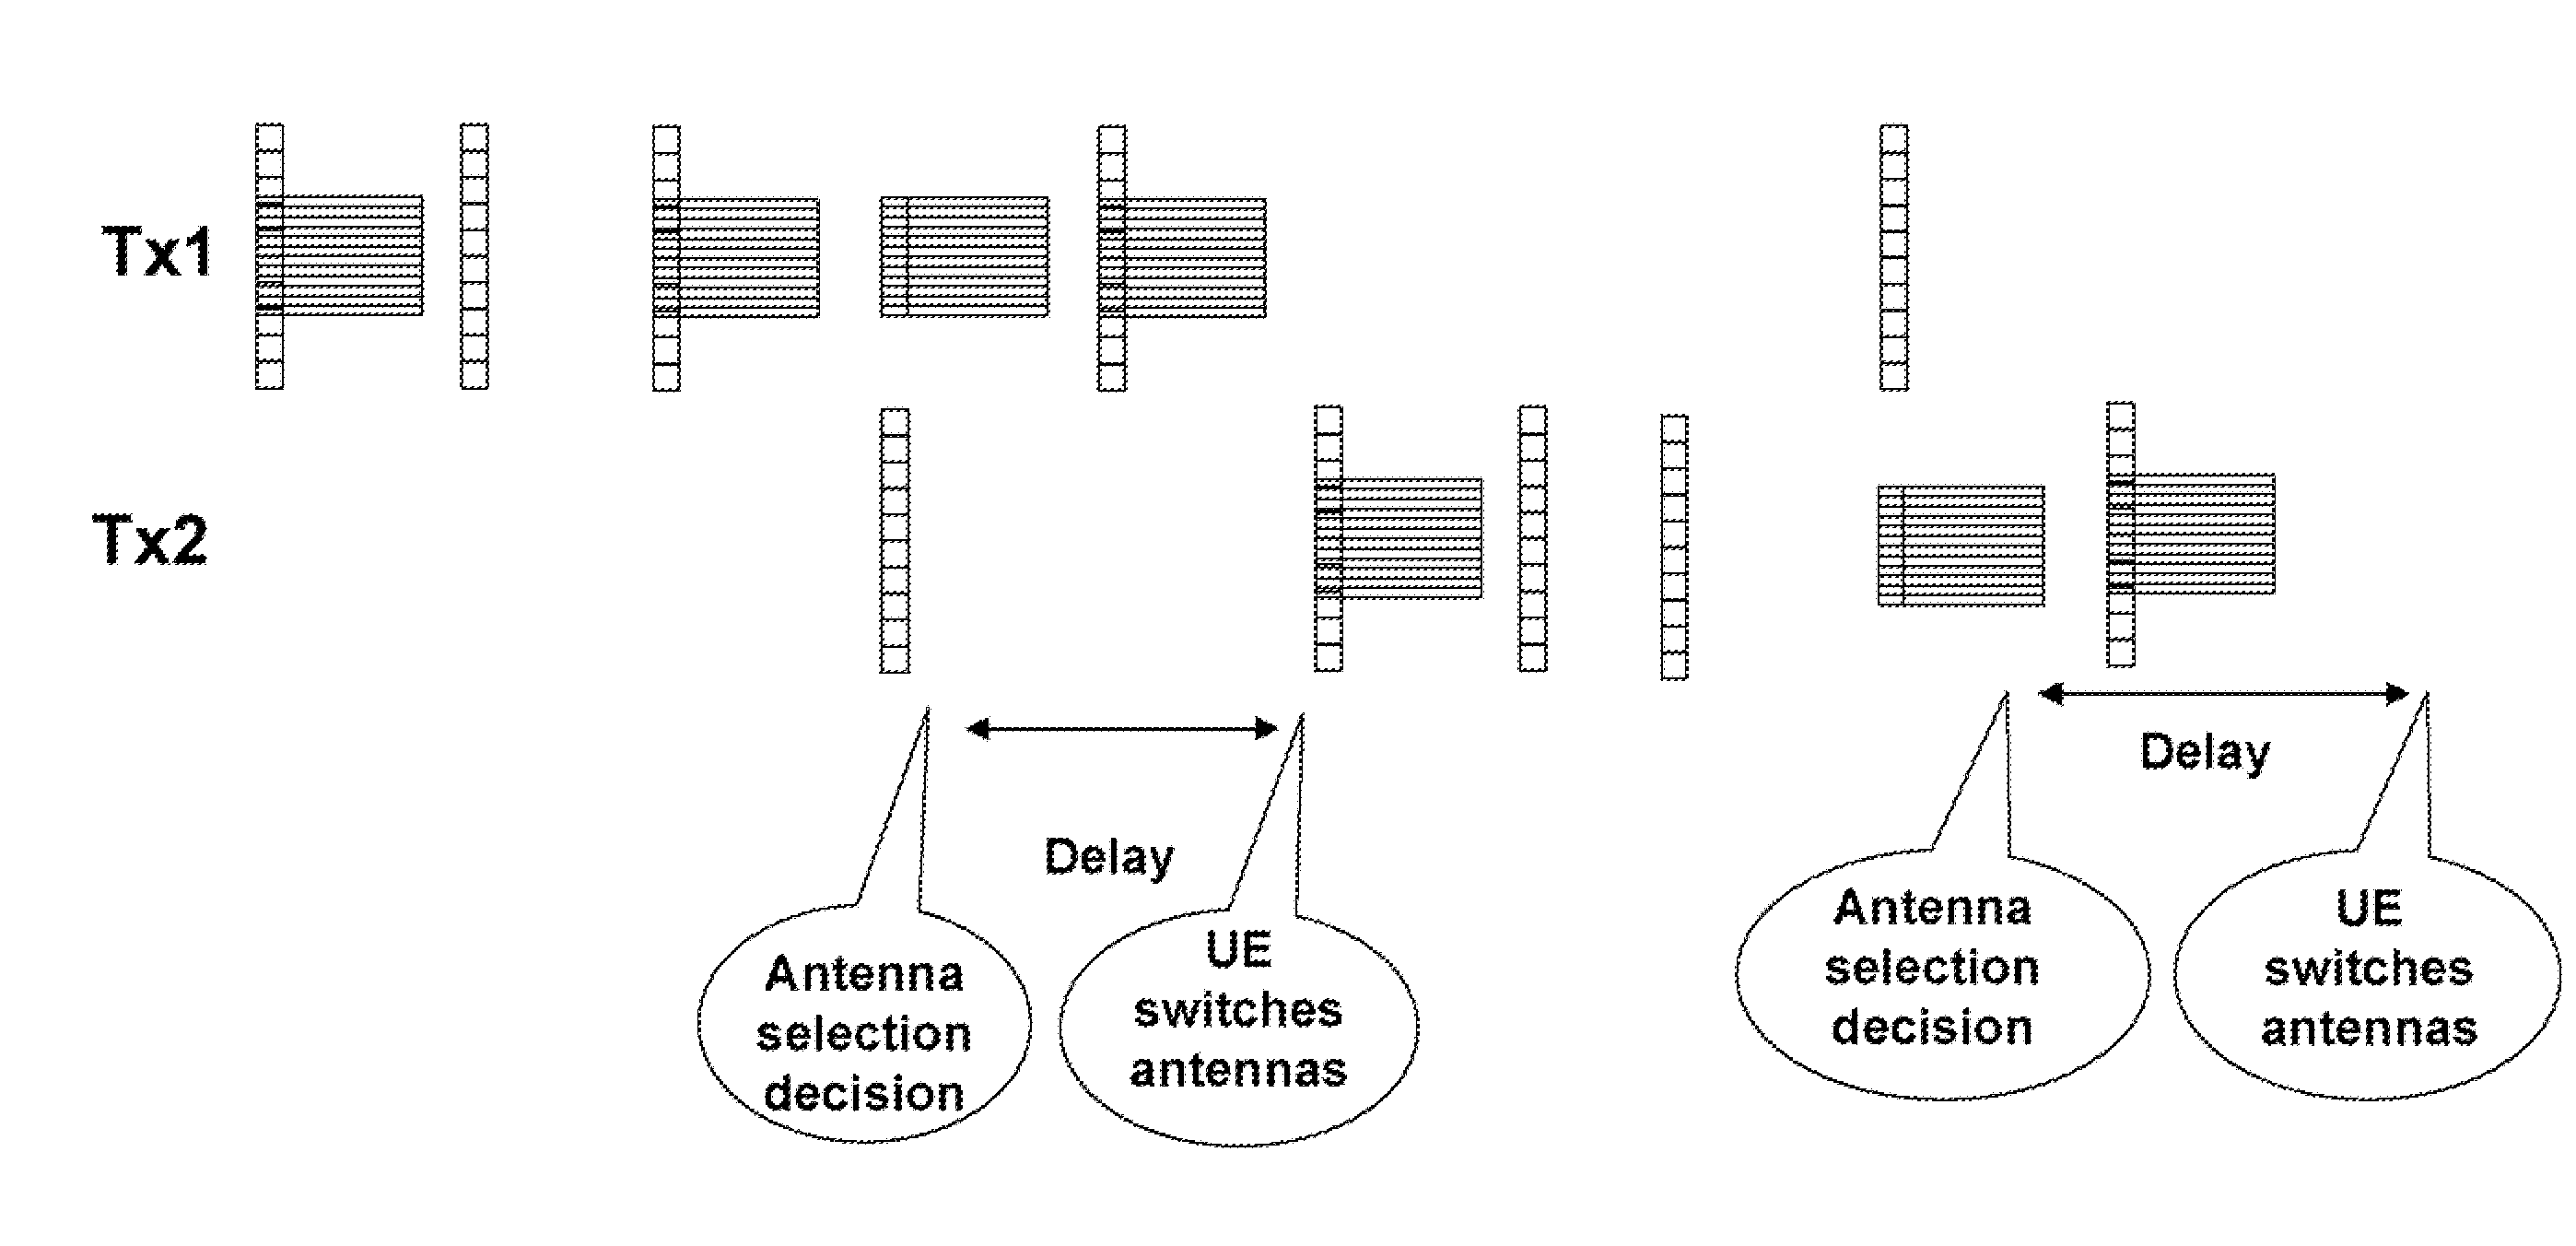 Method and System for Generating Antenna Selection Signals in Wireless Networks